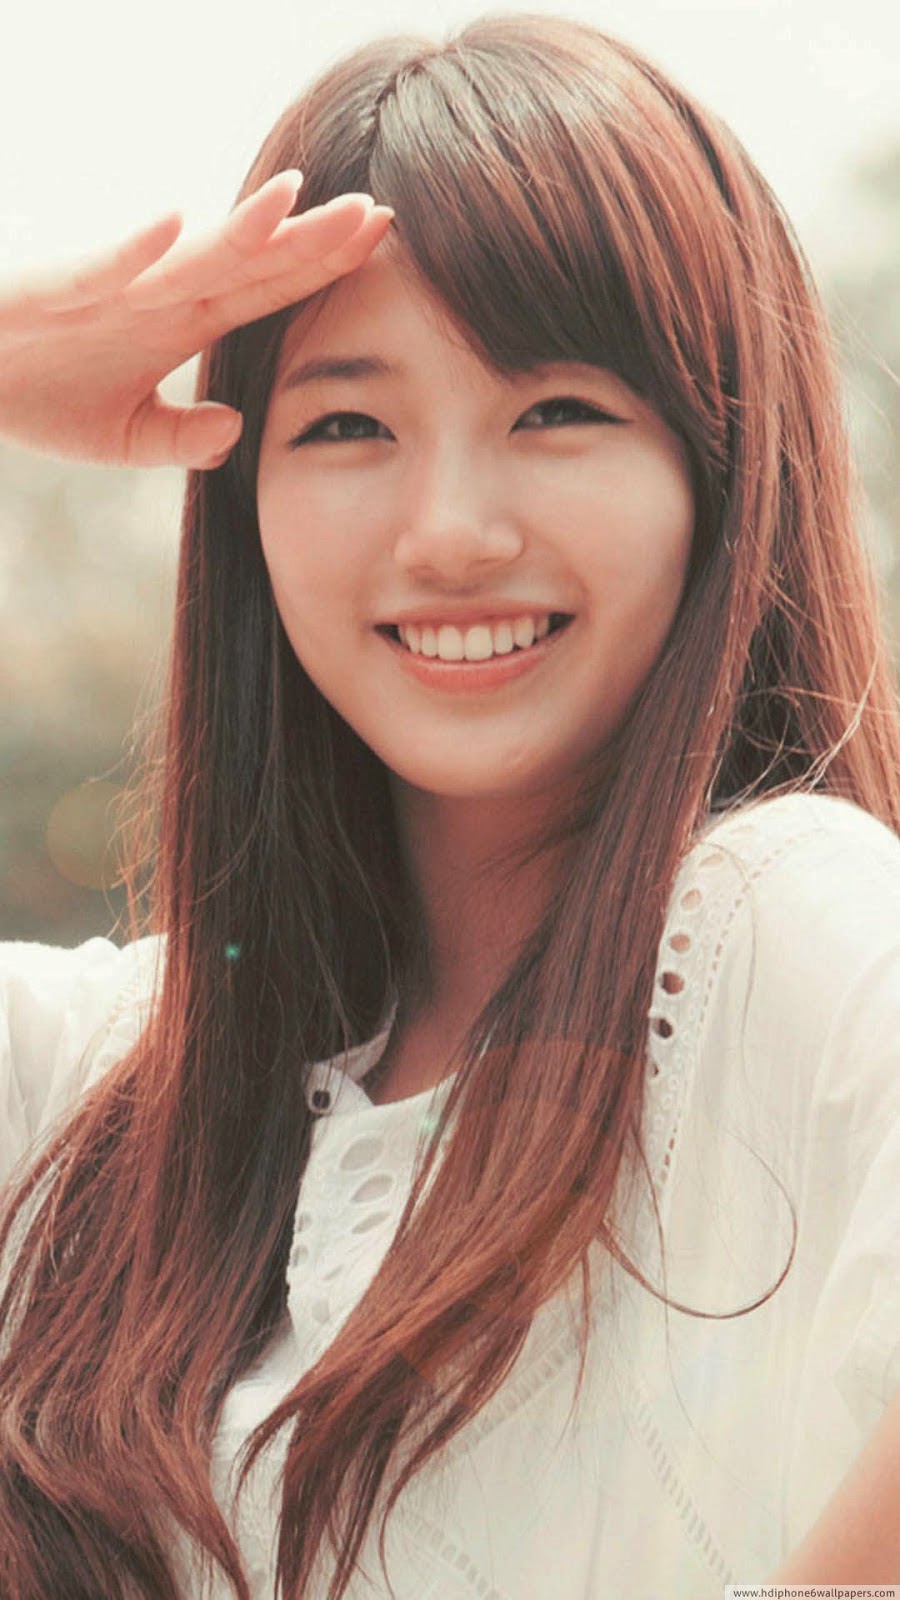 Suzy Miss A IPhone 6 Wallpaper IPhone 6 Wallpapers HD